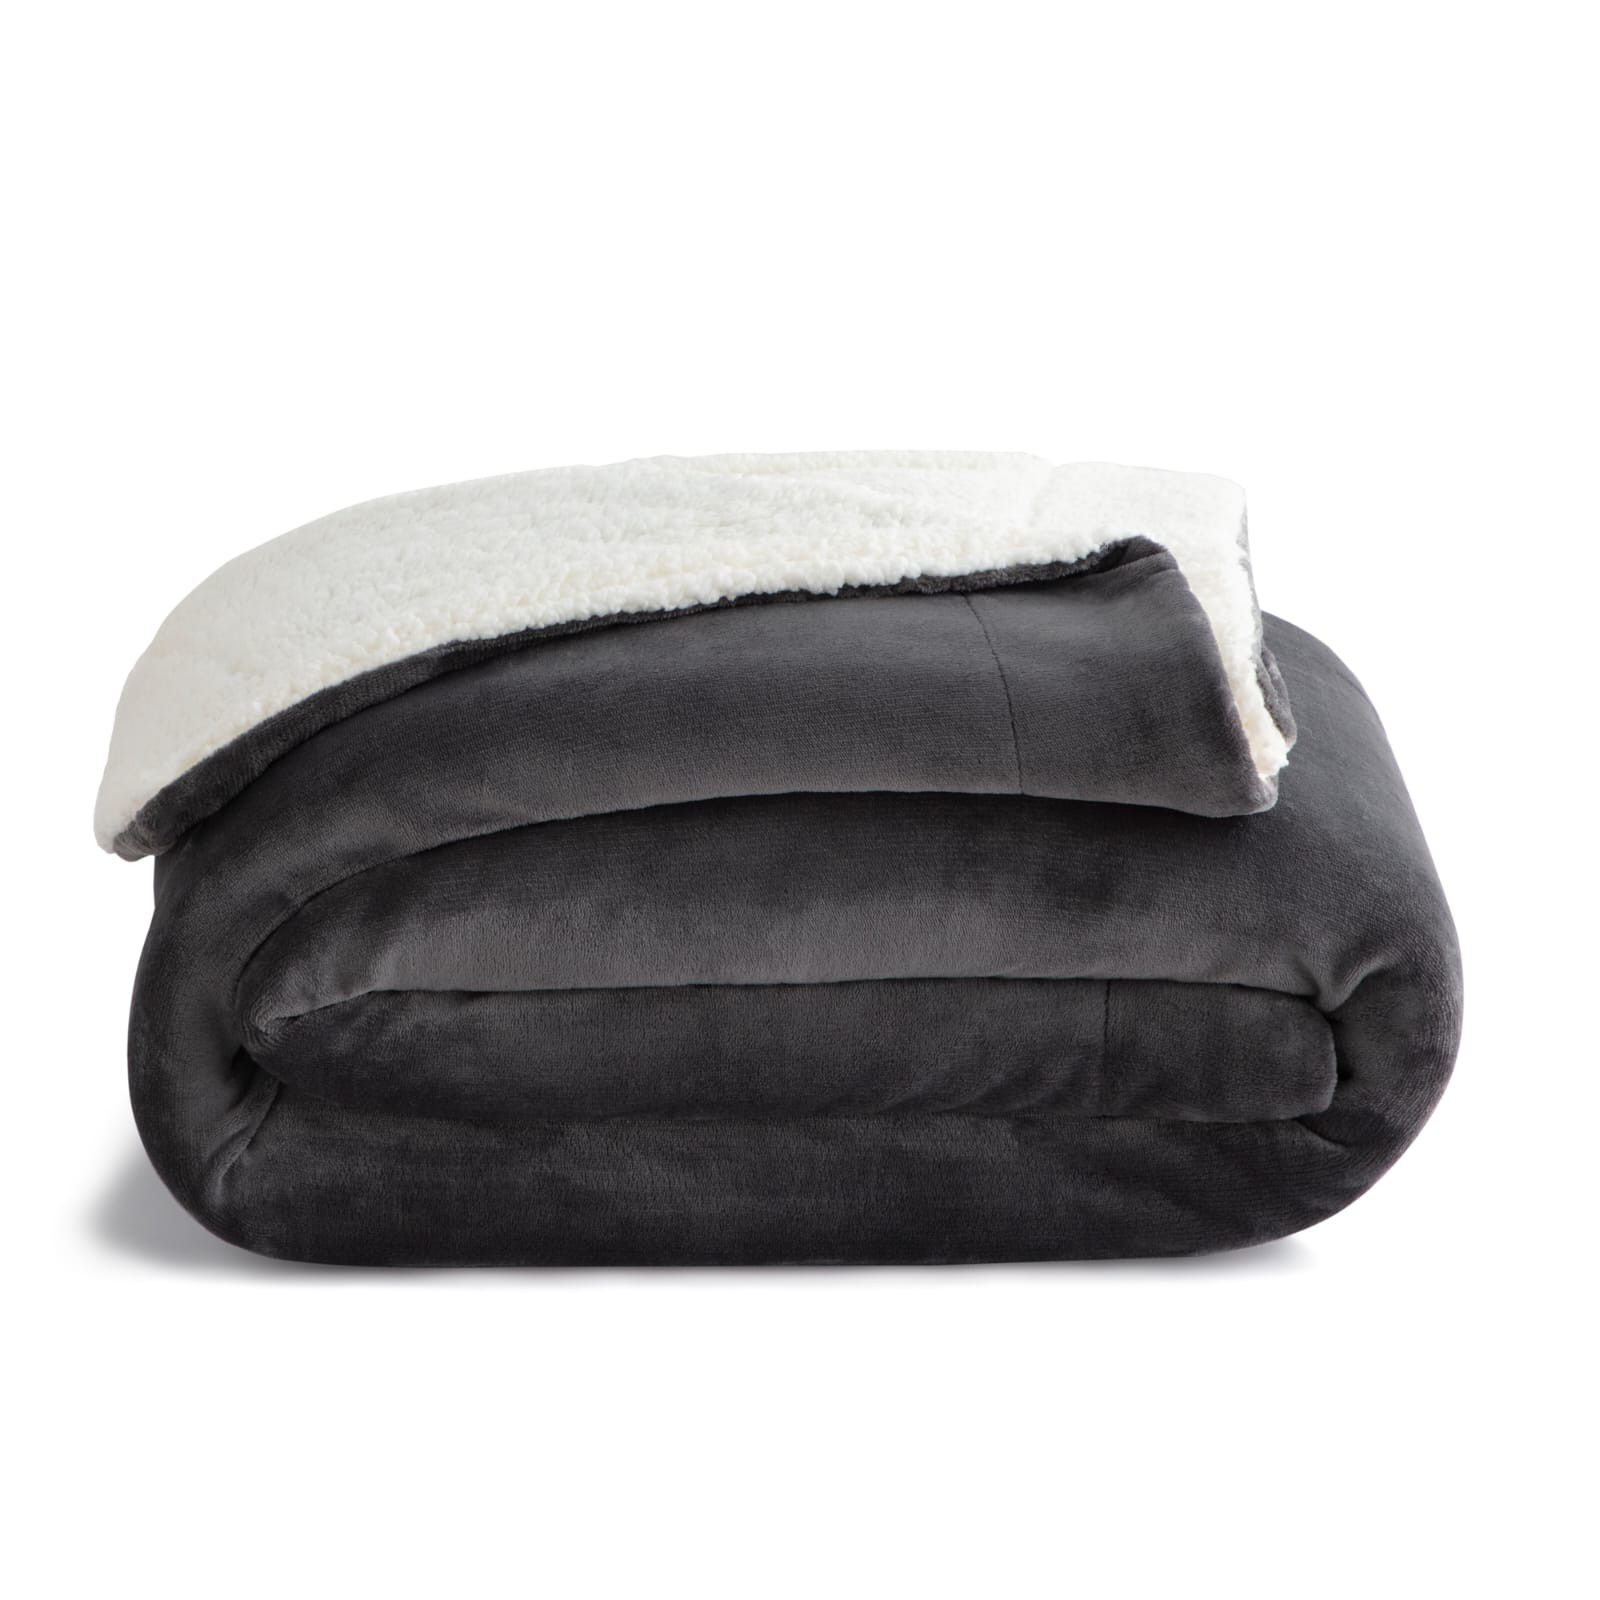 Super Comfy Sherpa Blanket Queen Size Great Addition To A Brand New Mattress And Bed Set